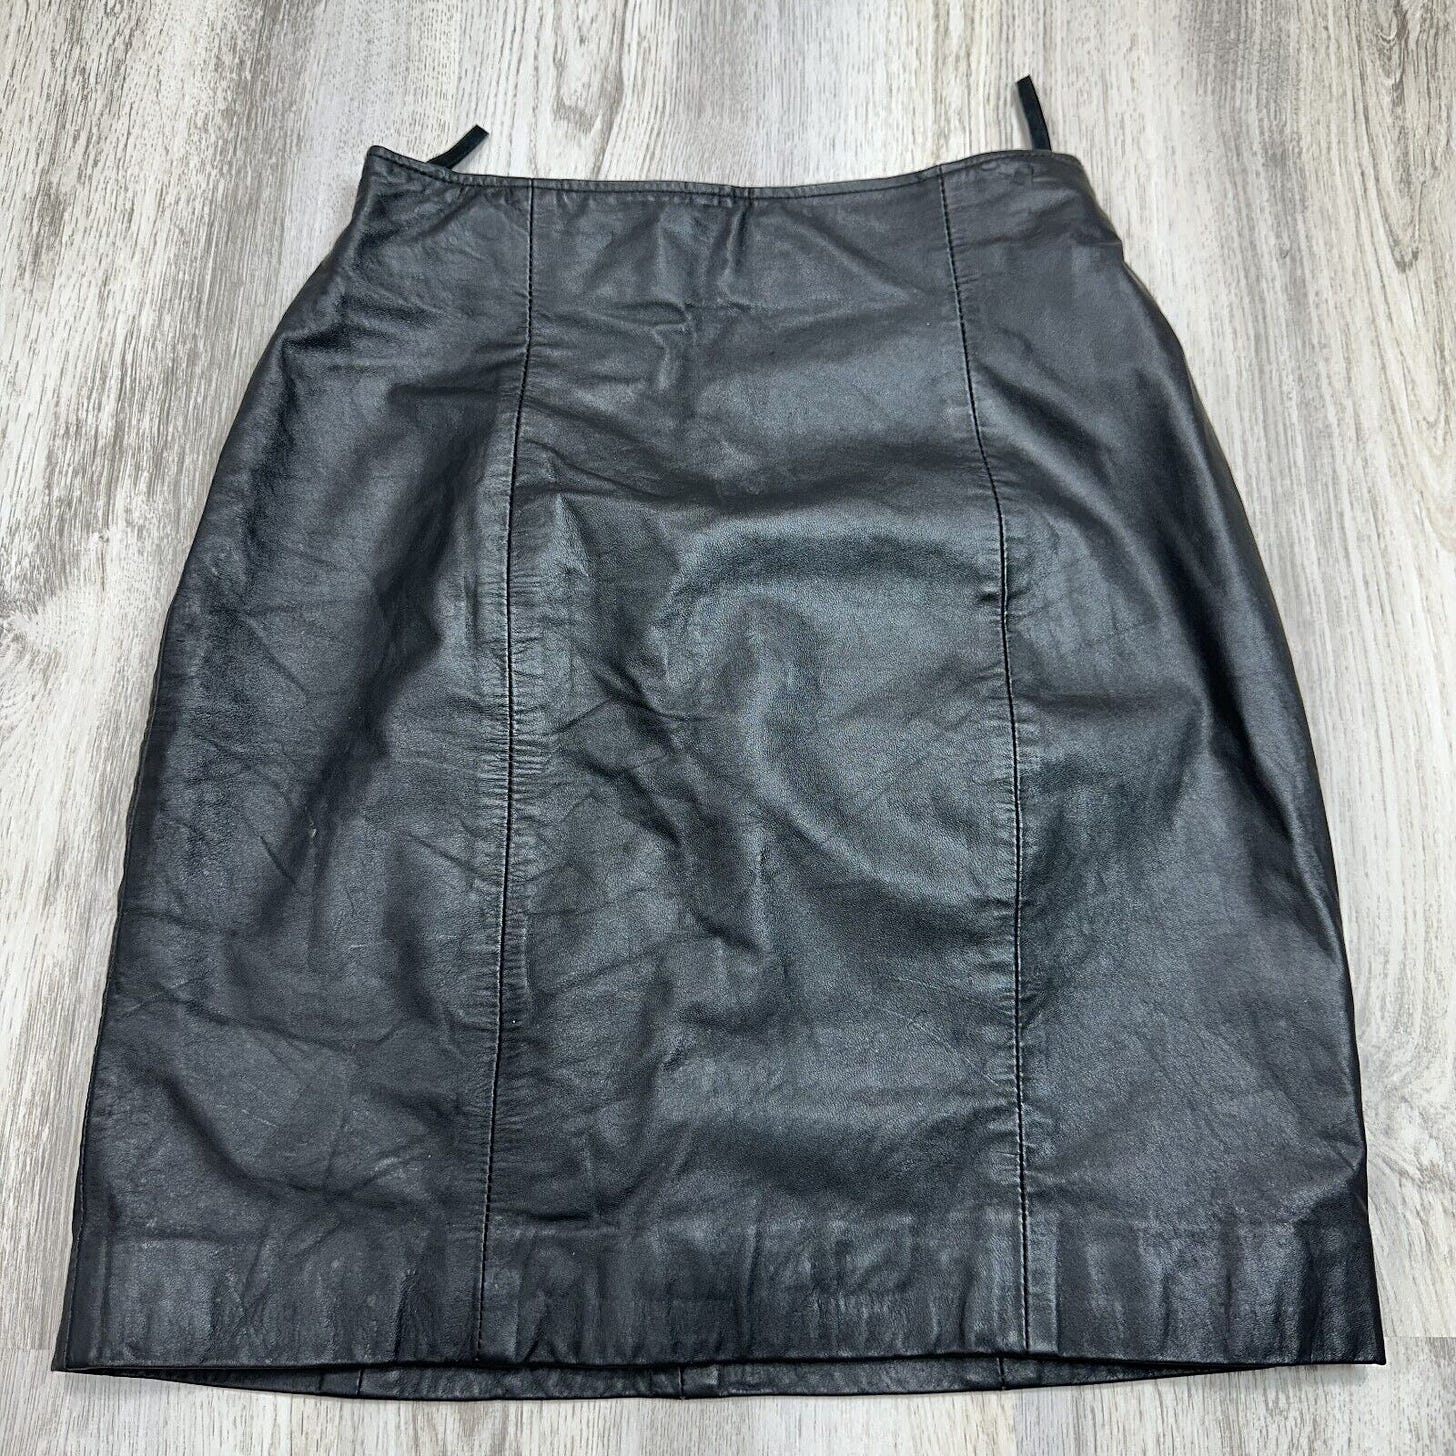 Wilson's The Leather Experts Black Leather Mini Skirt Lined Casual Party Sz 6 - Picture 1 of 11